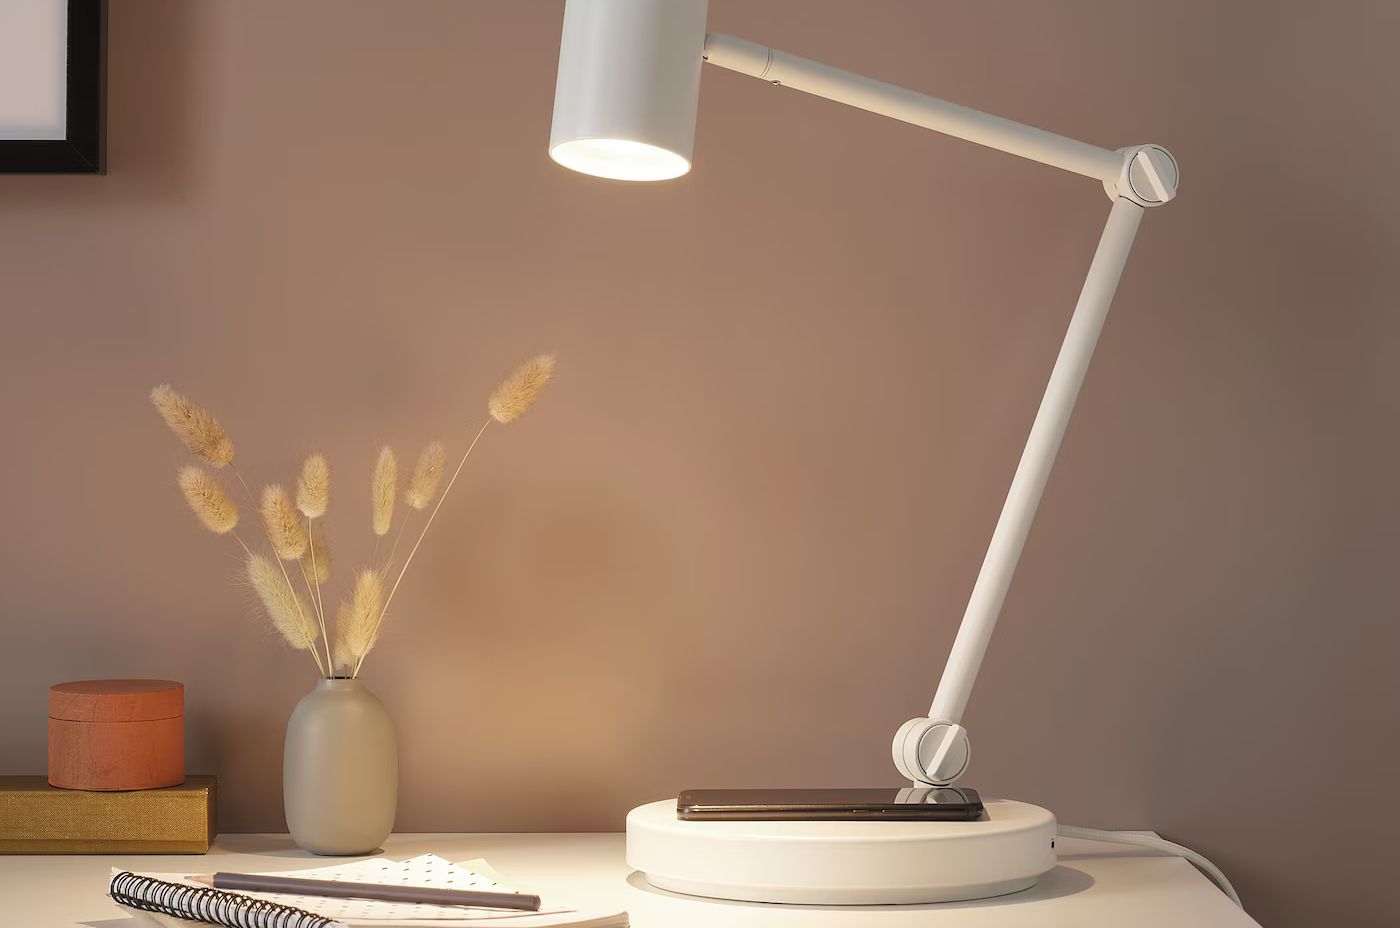 Nymane work lamp with wireless charging.